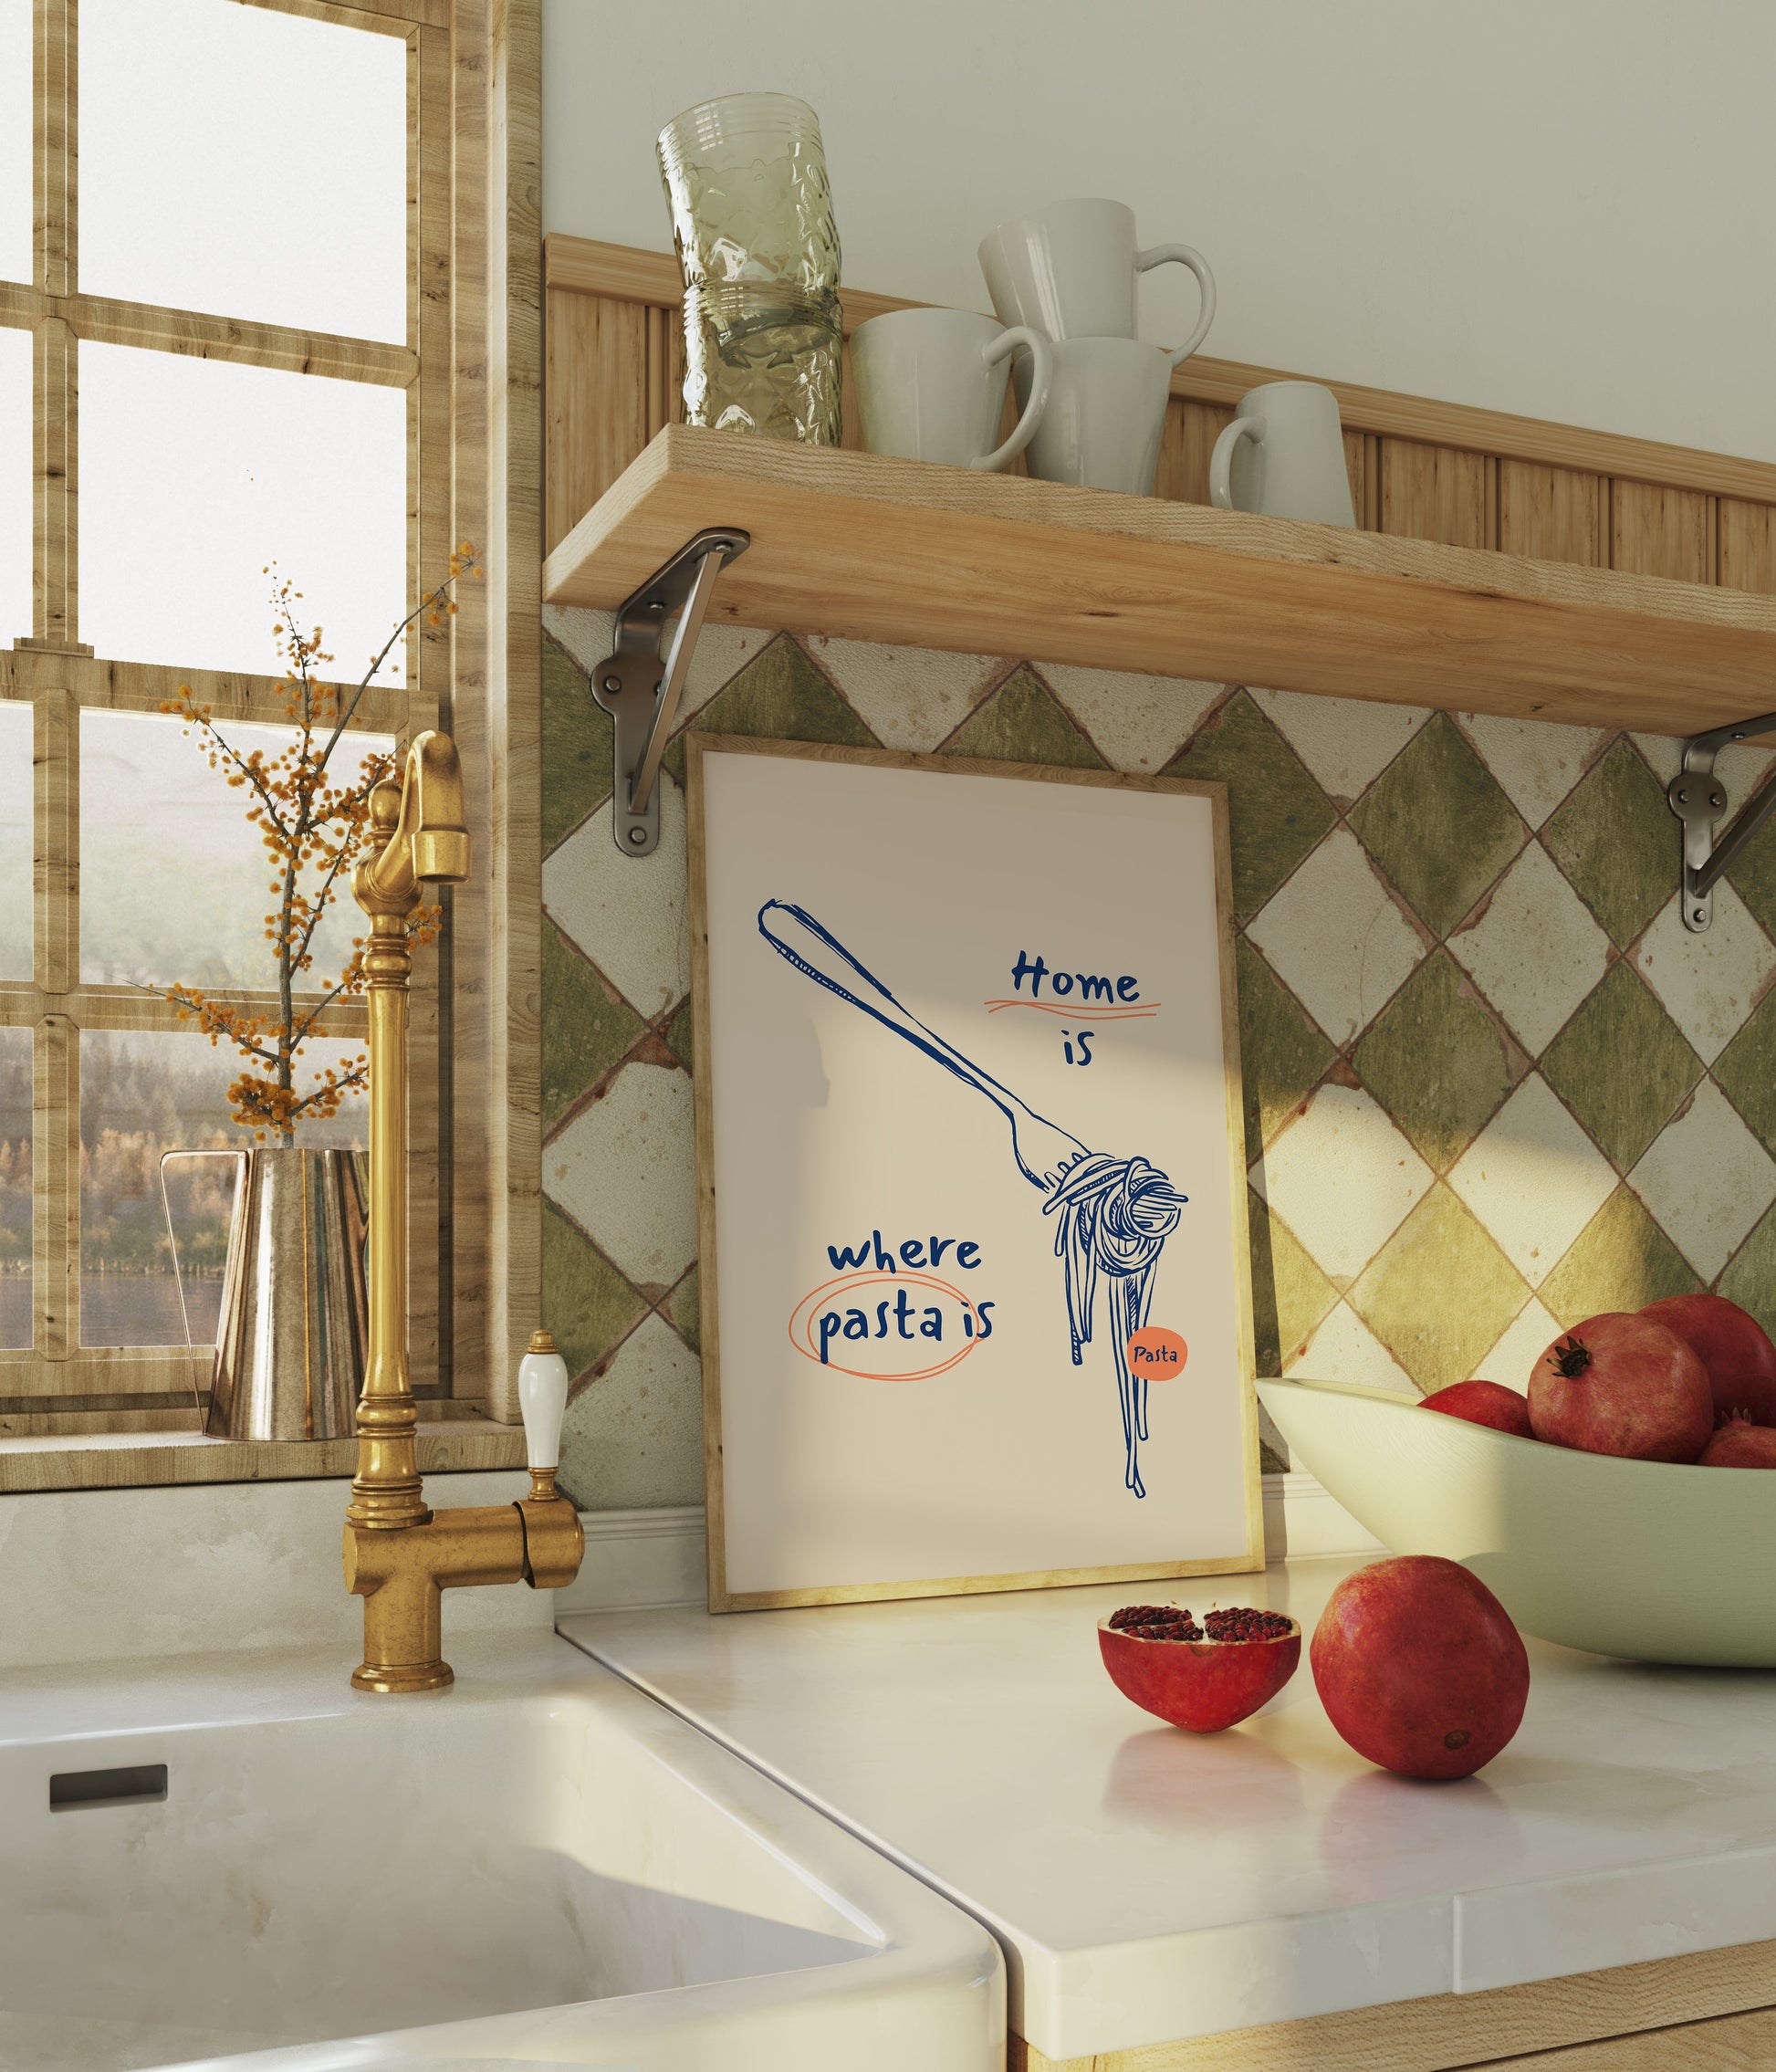 a picture of a kitchen with apples and a bowl of apples